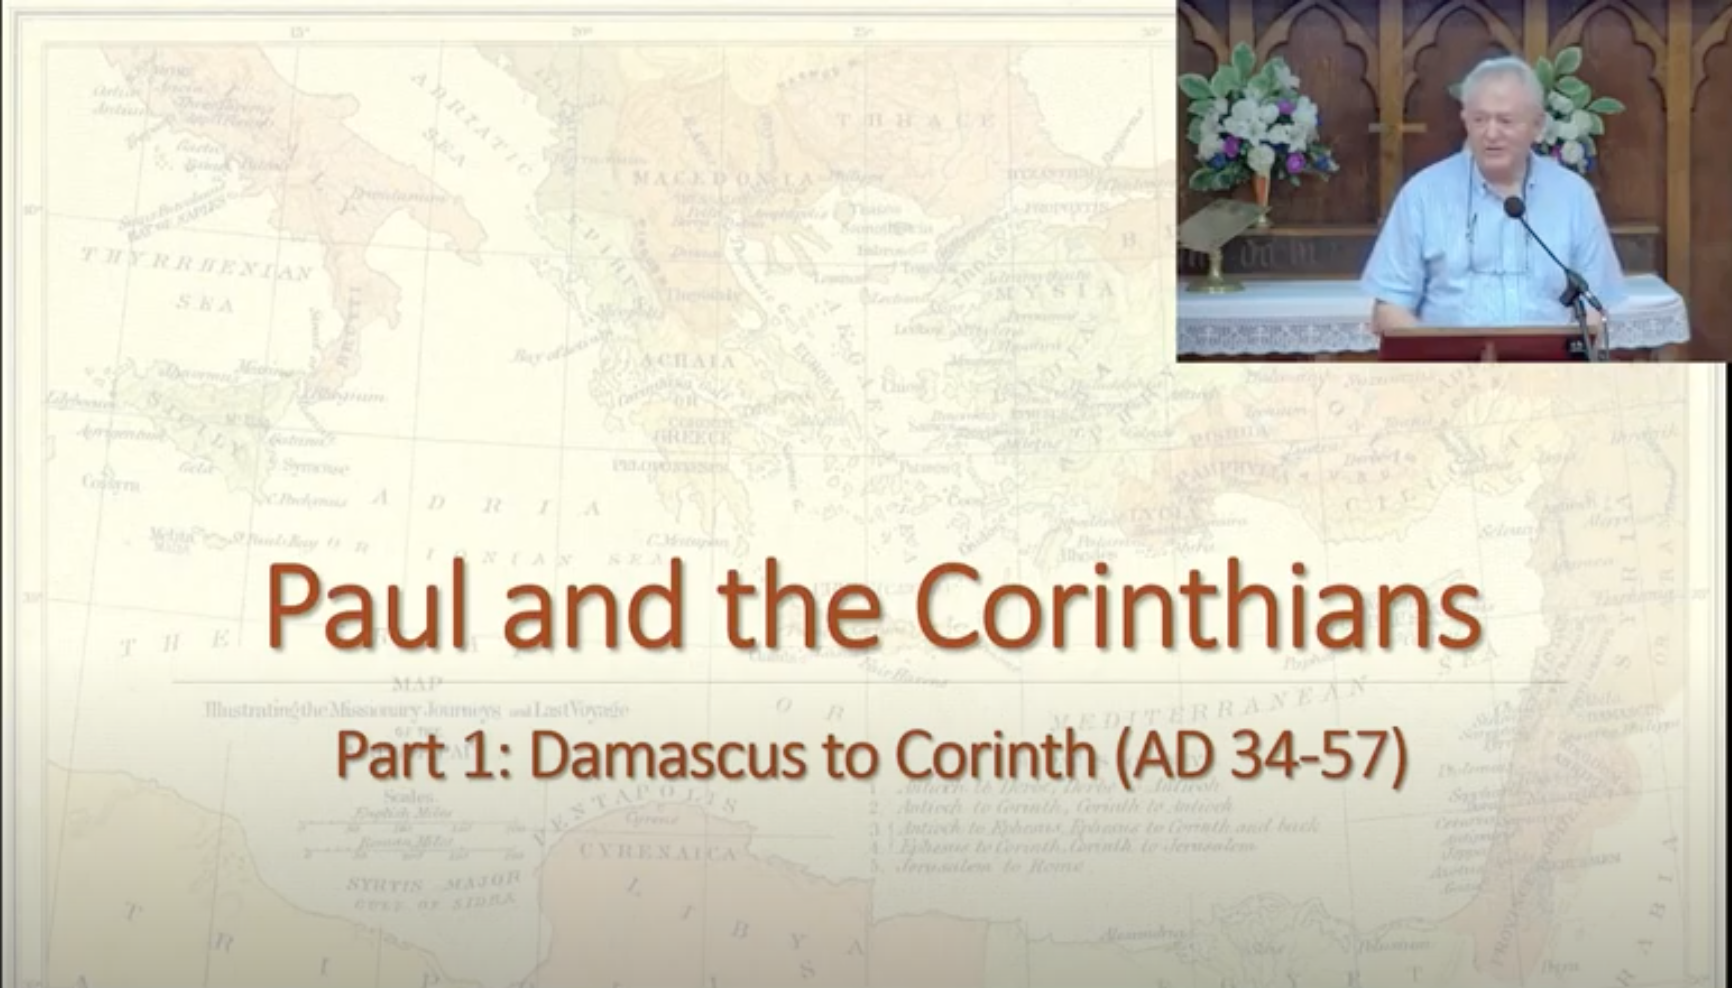 Paul and the Corinthians